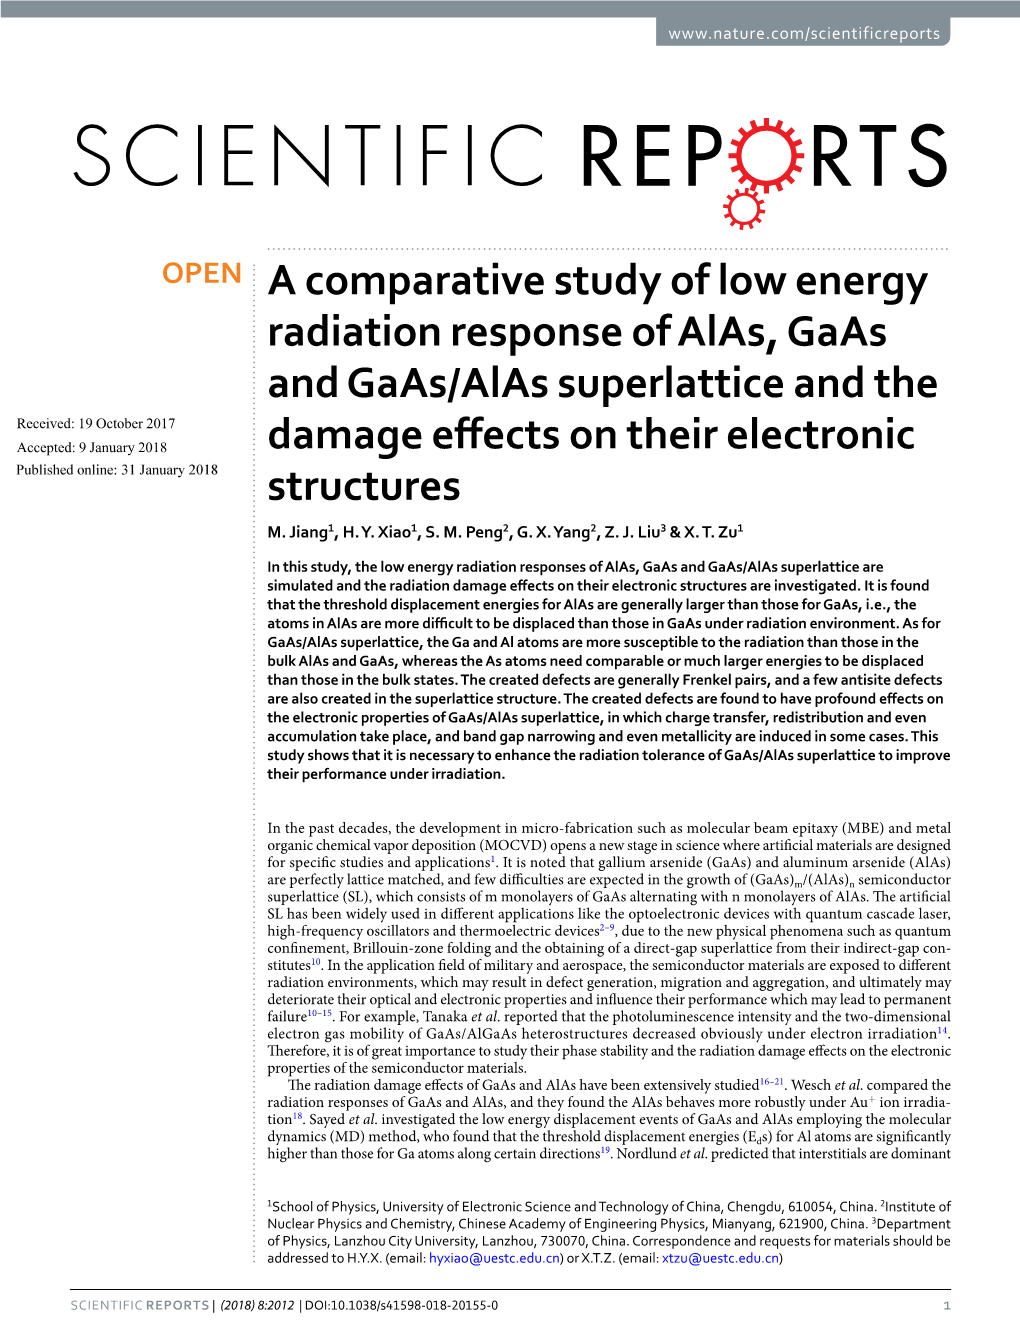 A Comparative Study of Low Energy Radiation Response of Alas, Gaas and Gaas/Alas Superlattice and the Damage Effects on Their El